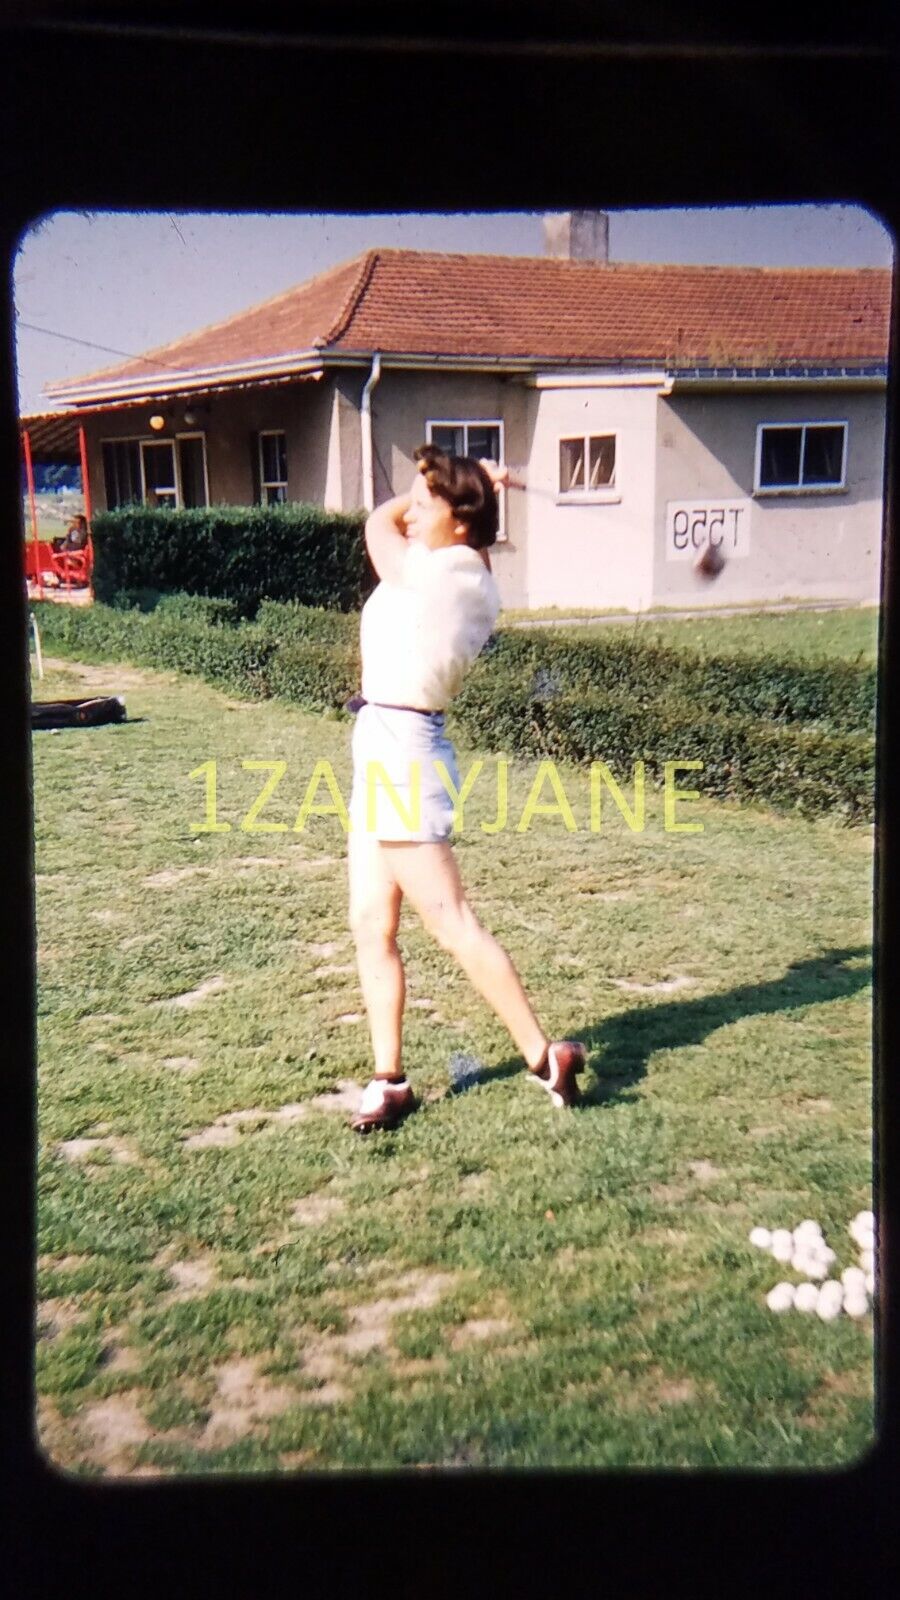 AO09 VINTAGE 35mm SLIDE TRANSPARENCY Photo WOMAN TEEING OFF CLUBHOUSE BACKGROUND